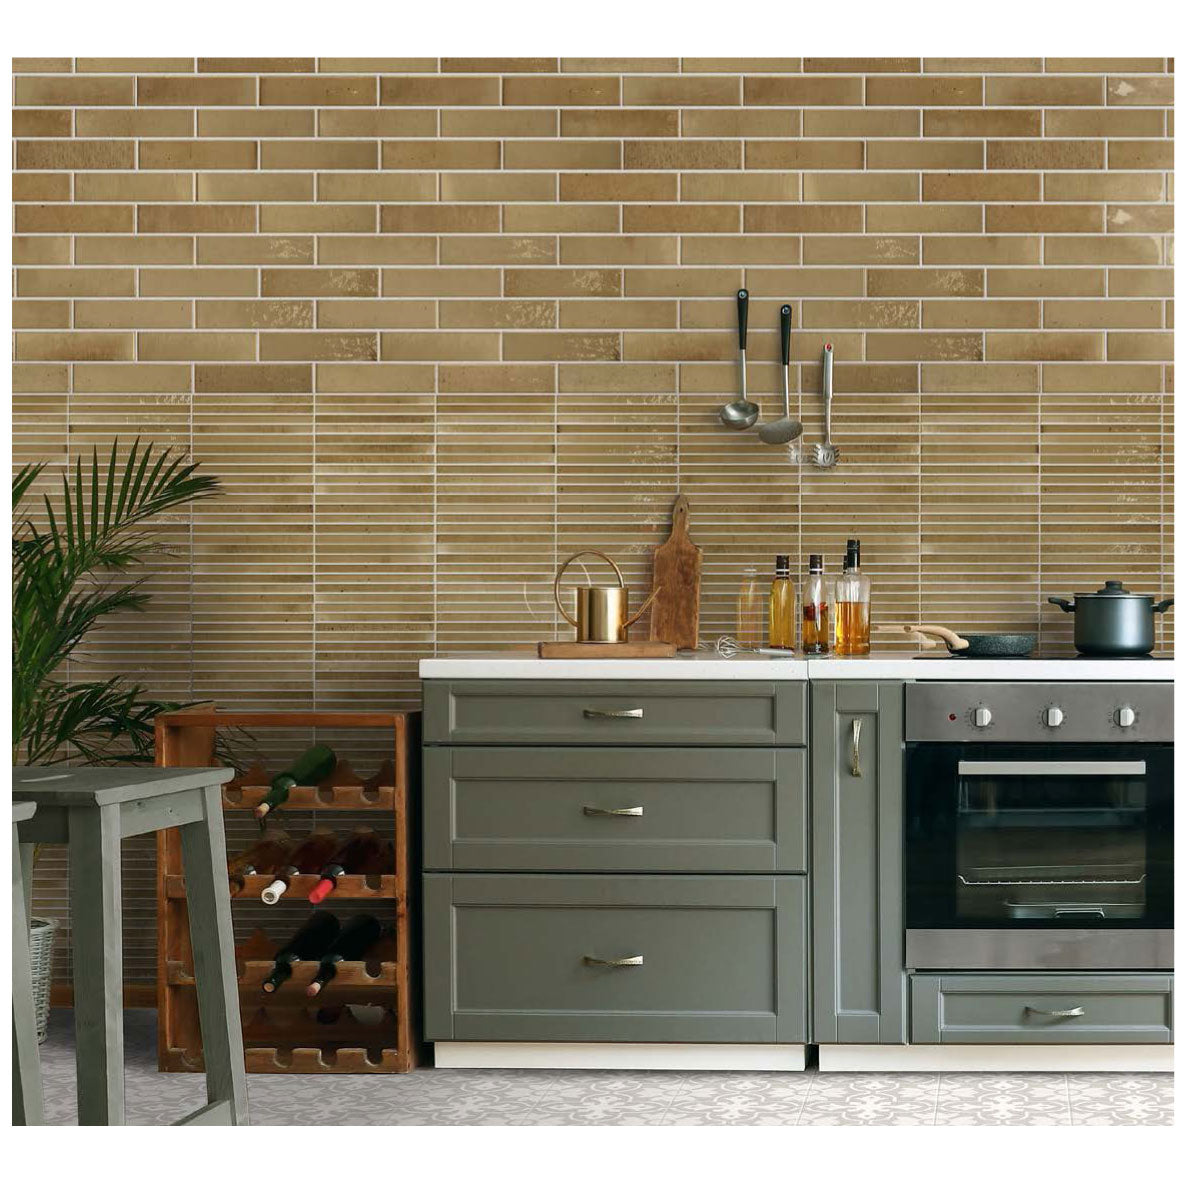 Cobsa - Homey Series 5 in. x 10 in. Porcelain Subway Tile - Curry